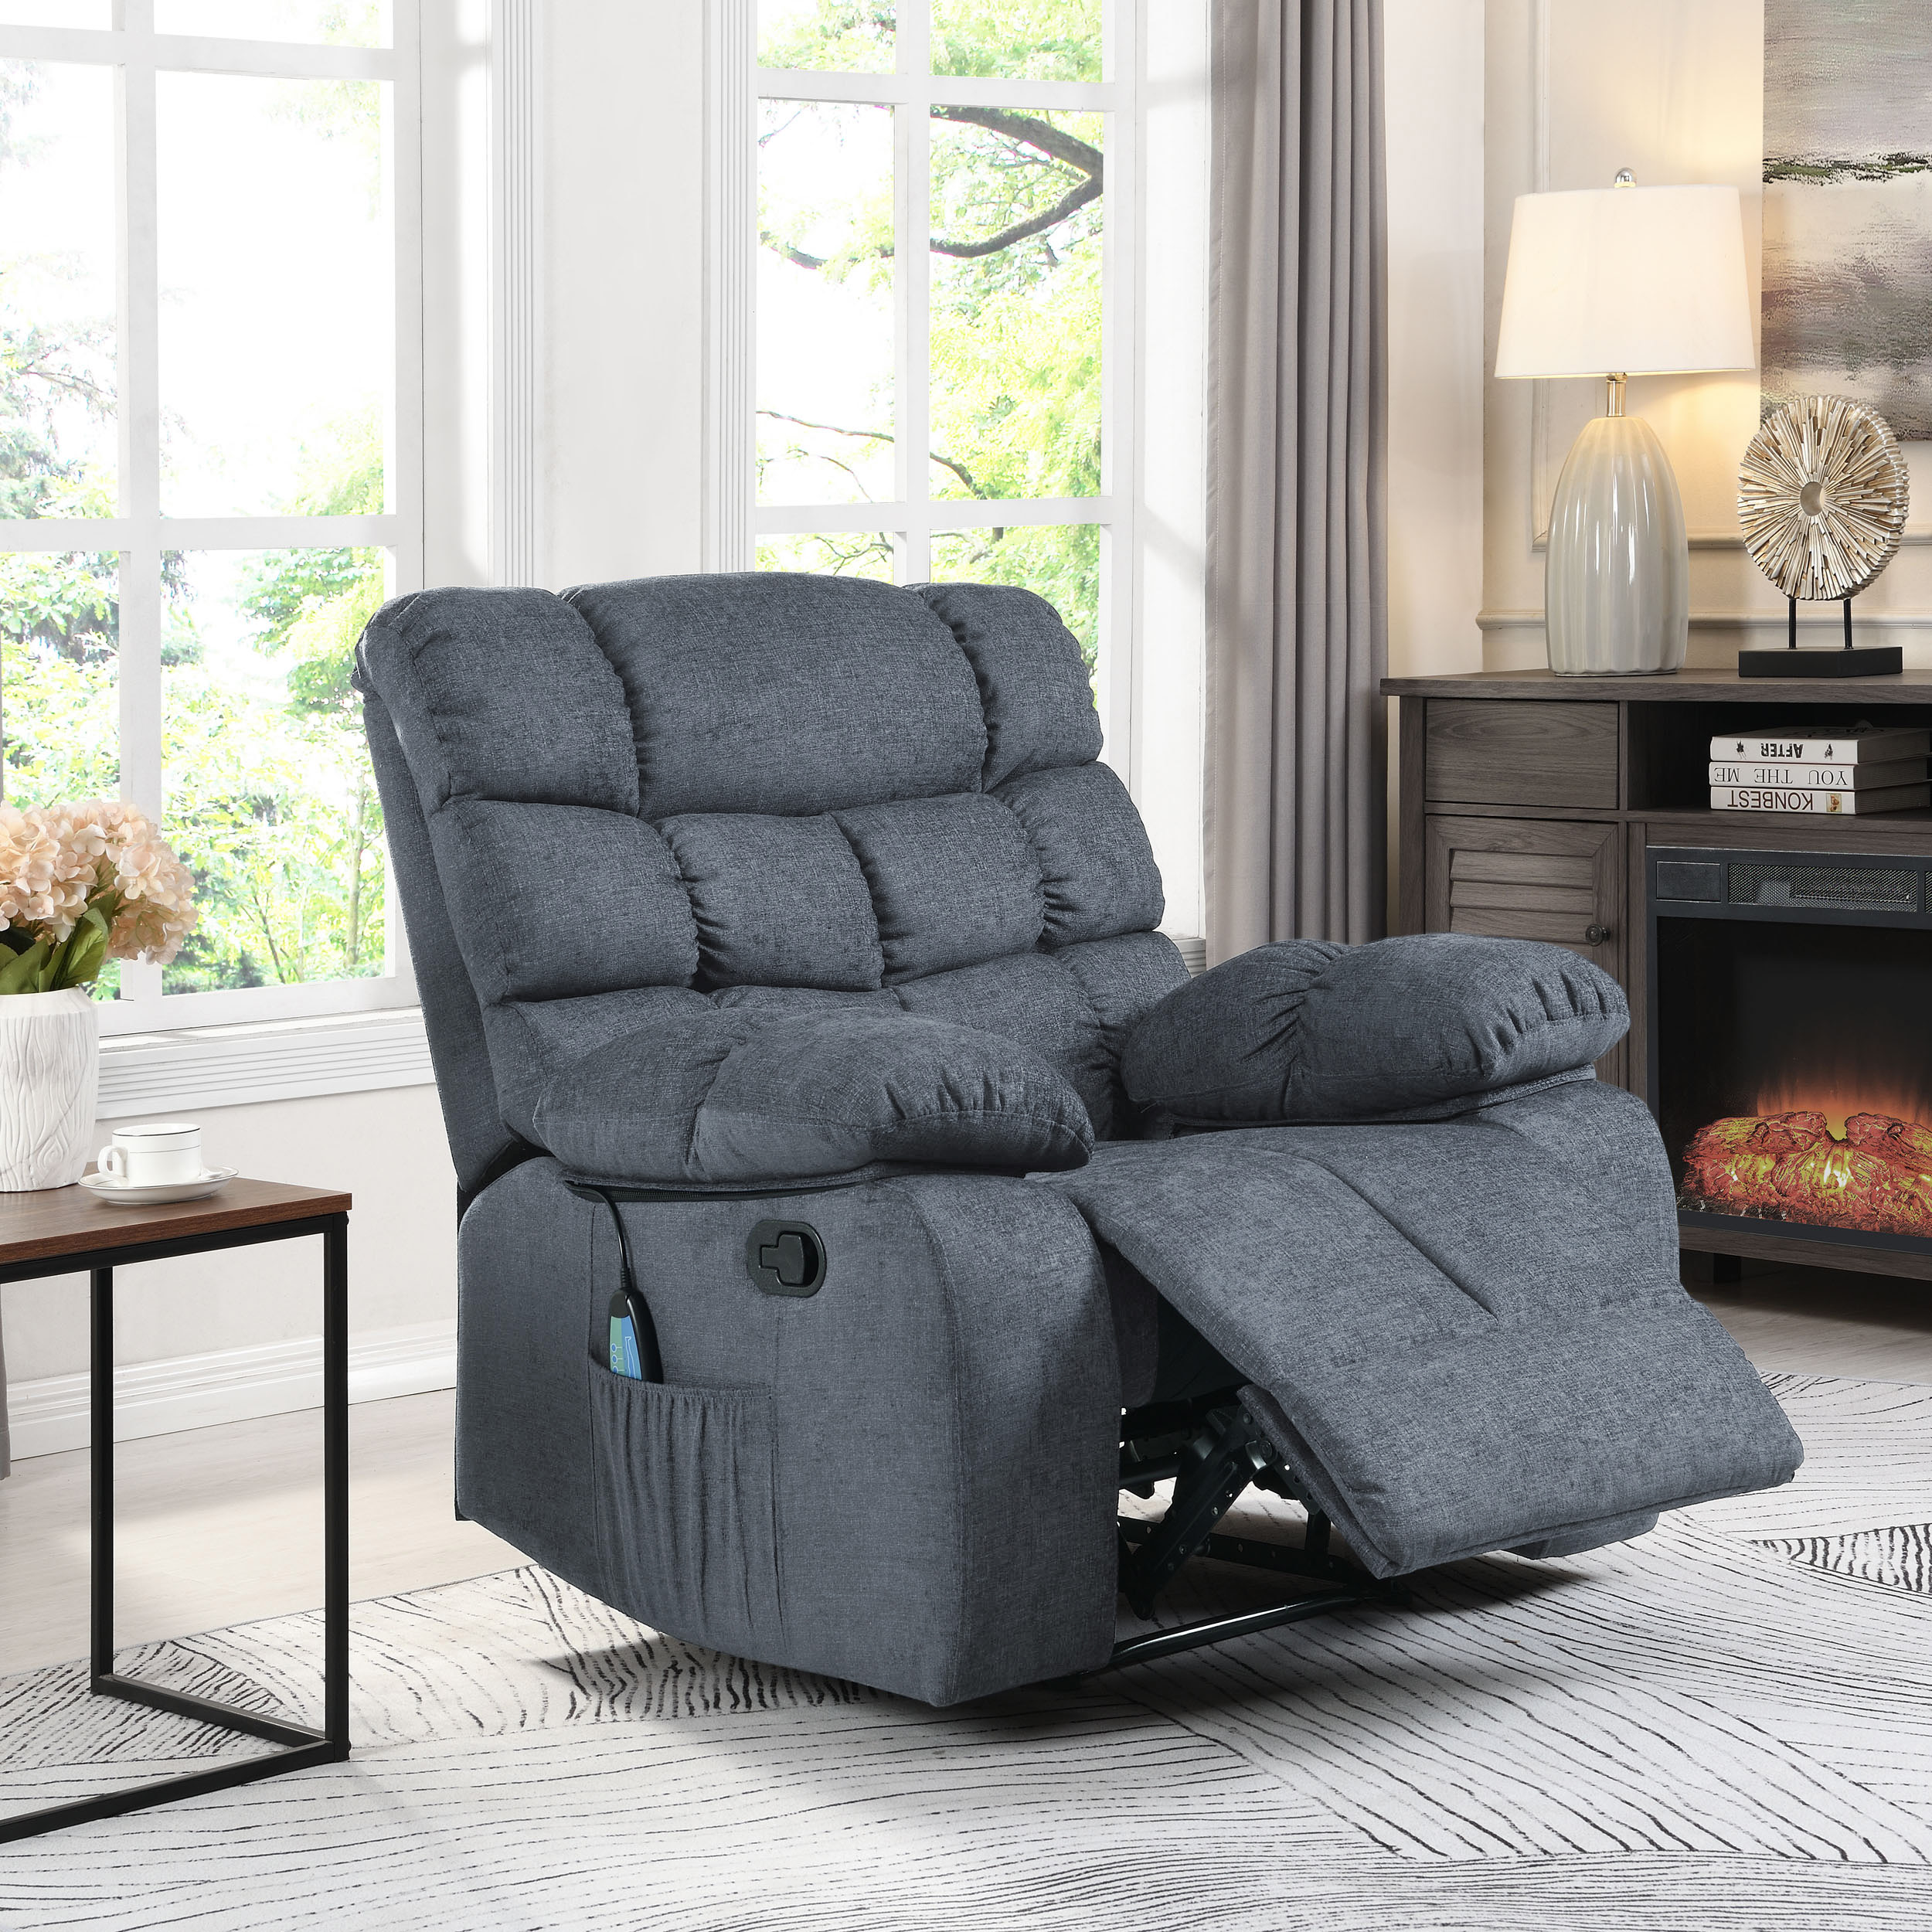 GDF Studio Conyers Contemporary Fabric Pillow Tufted Massage Recliner, Charcoal - image 3 of 12